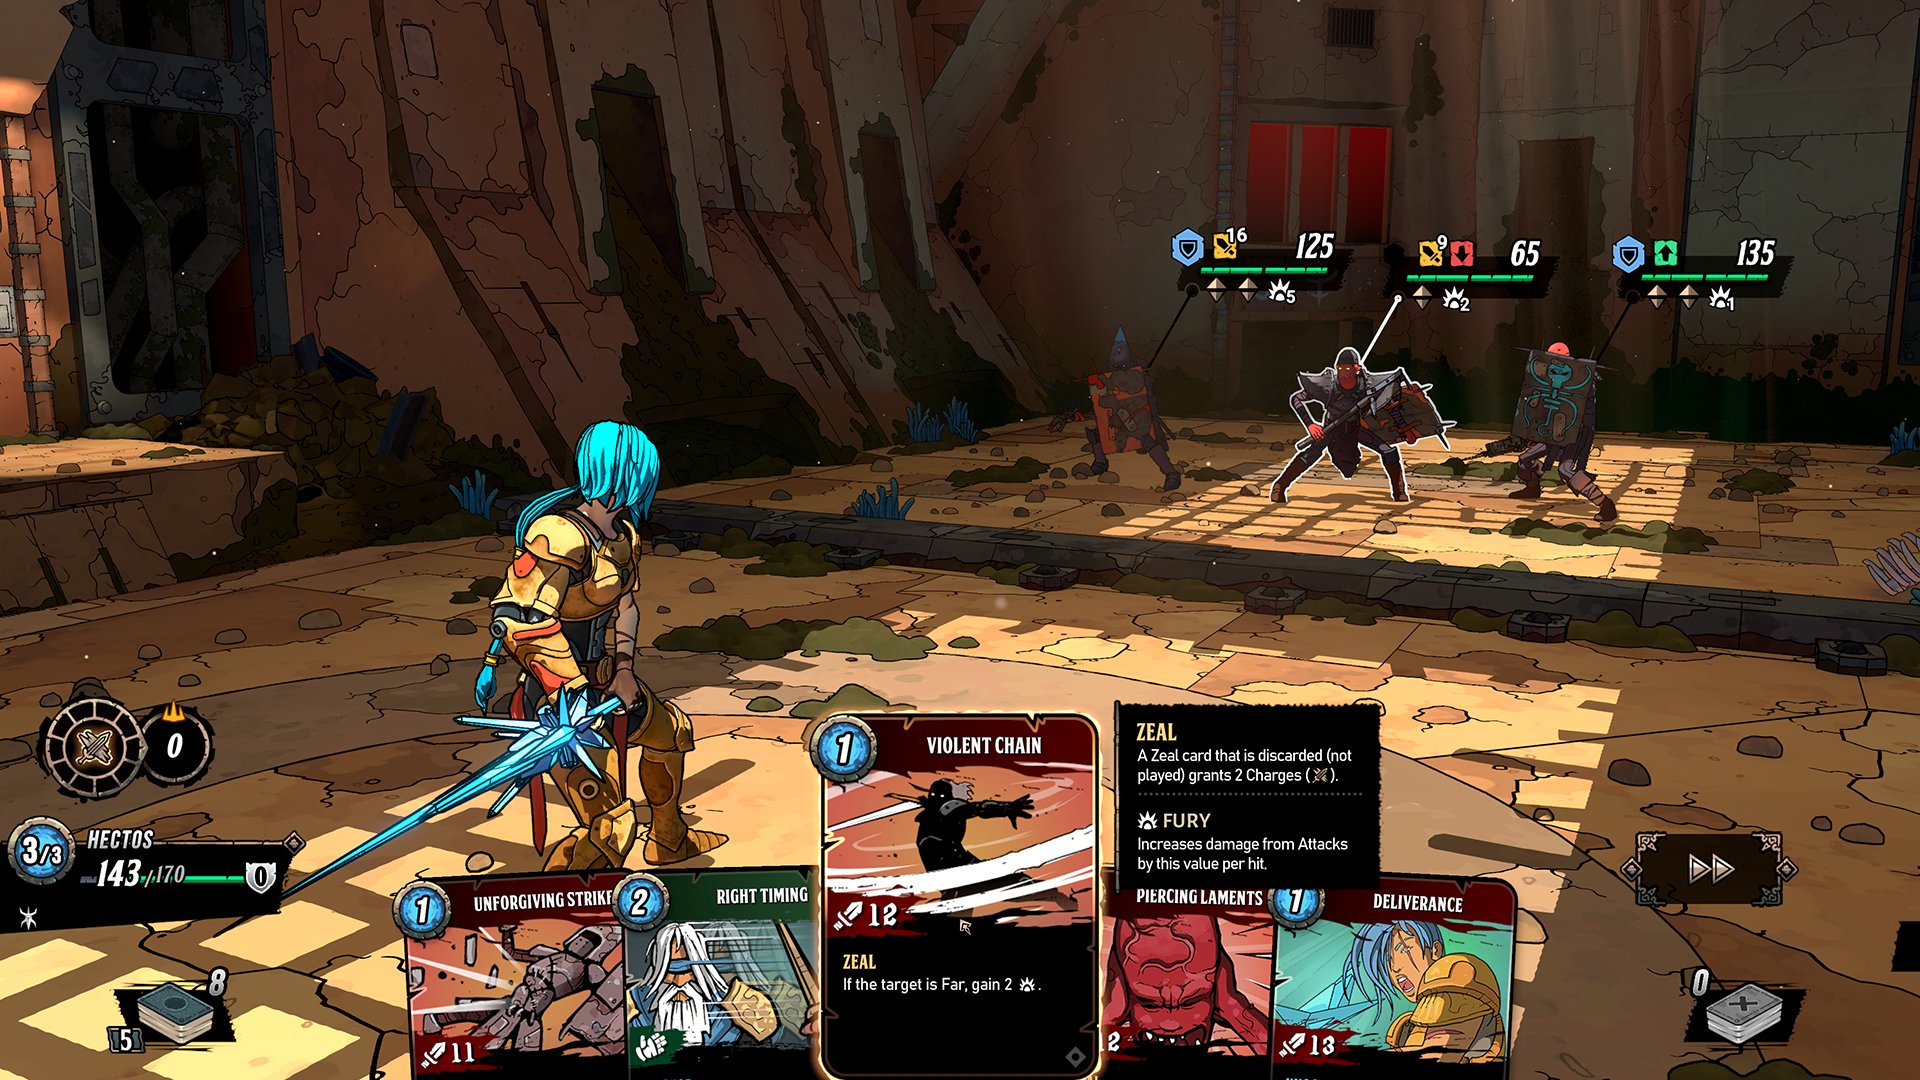 Scarlet Nexus Video Game Review. A fusion of JRPG, hack and slash